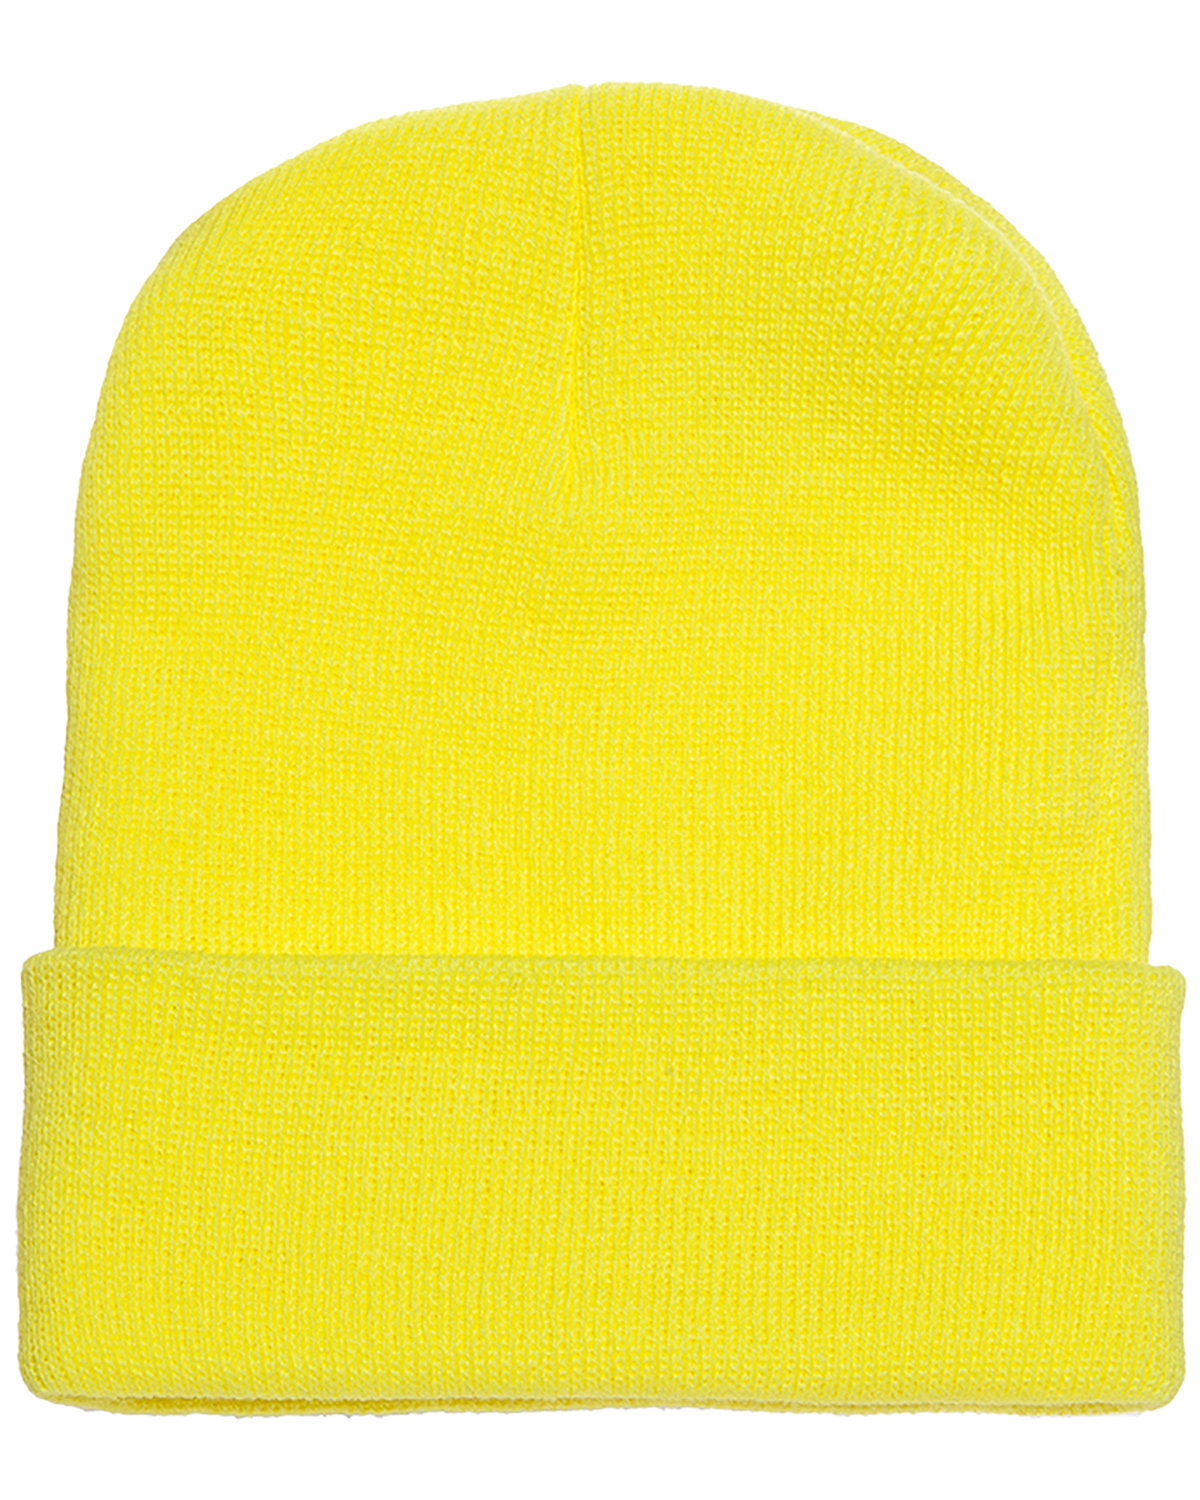 Headwear SAFETY YELLOW OS Yupoong